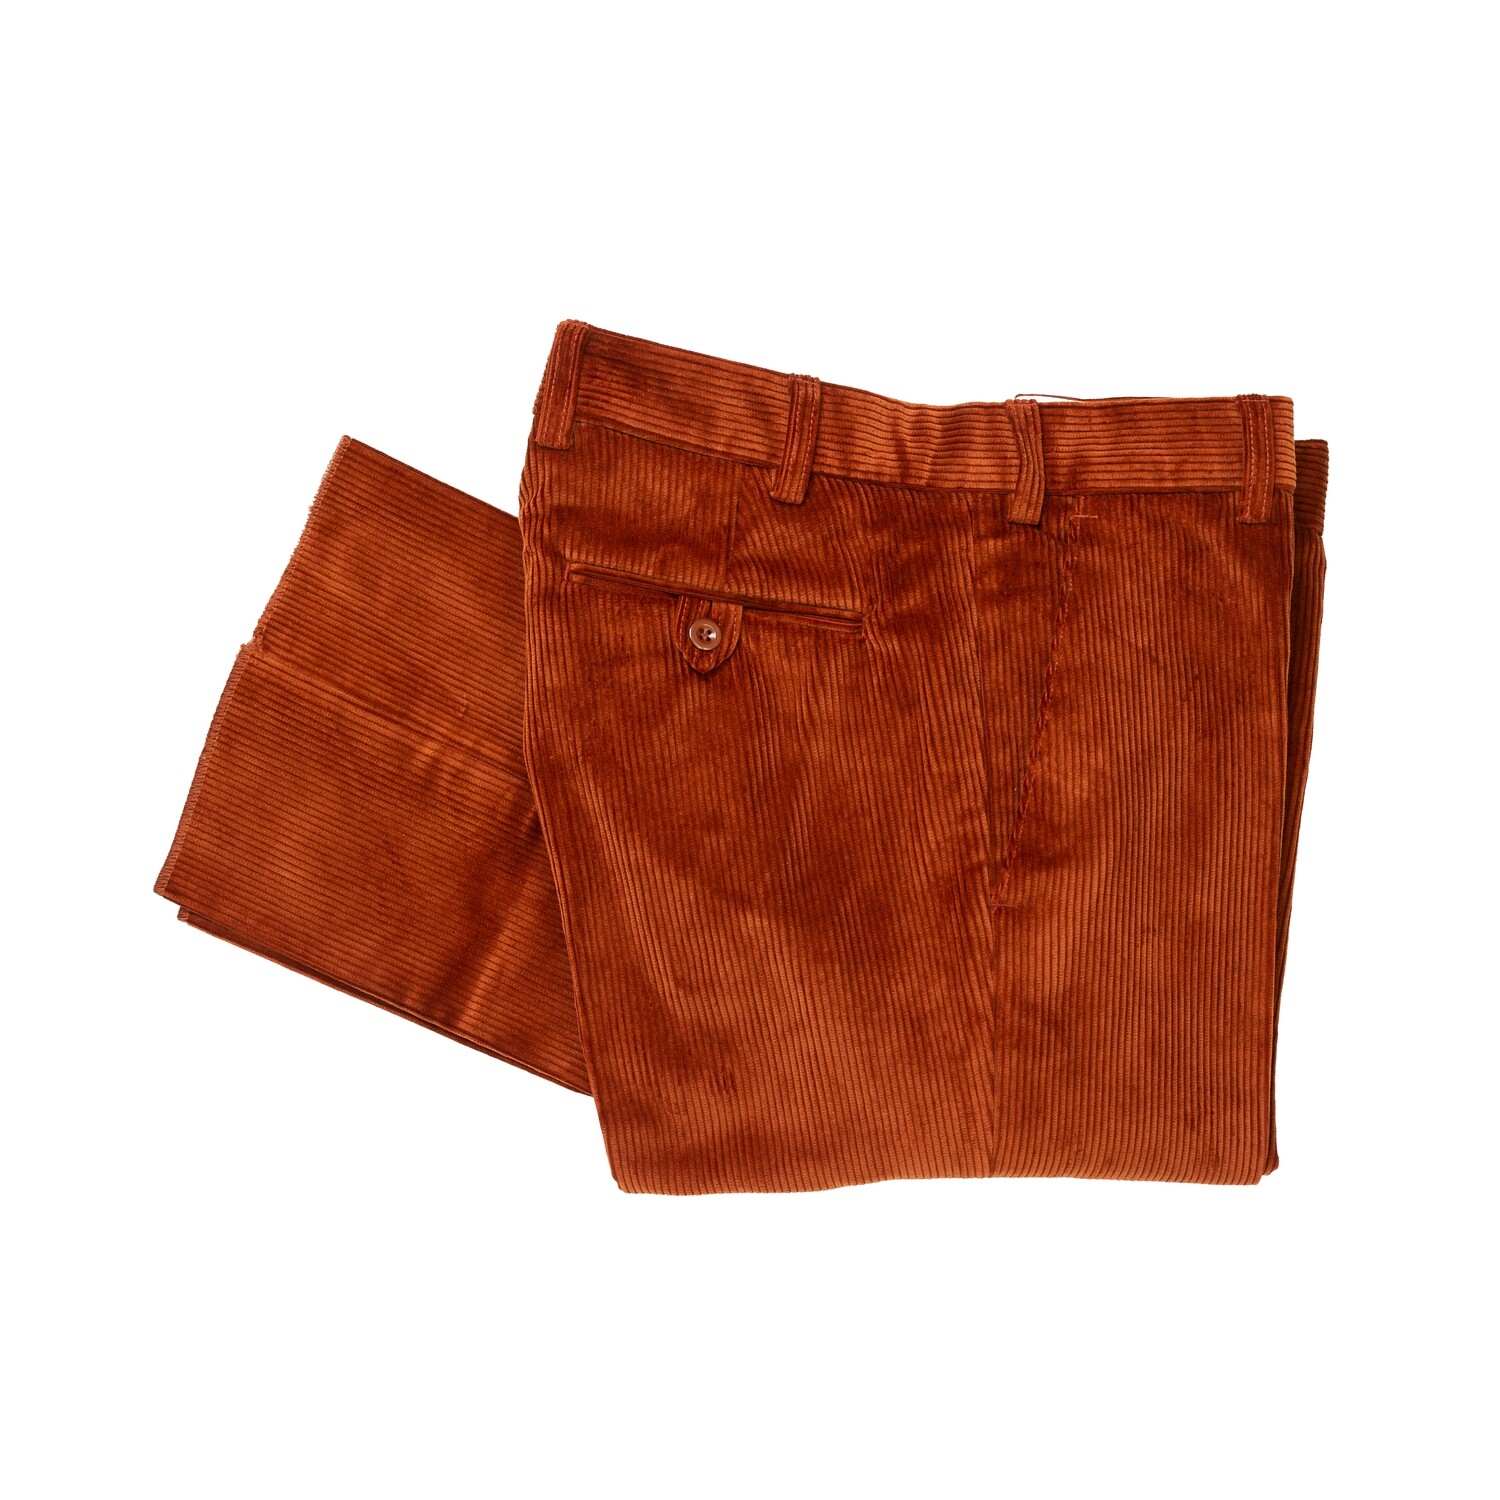 High Waist Corduroy Trousers  4 Colours  Just 7